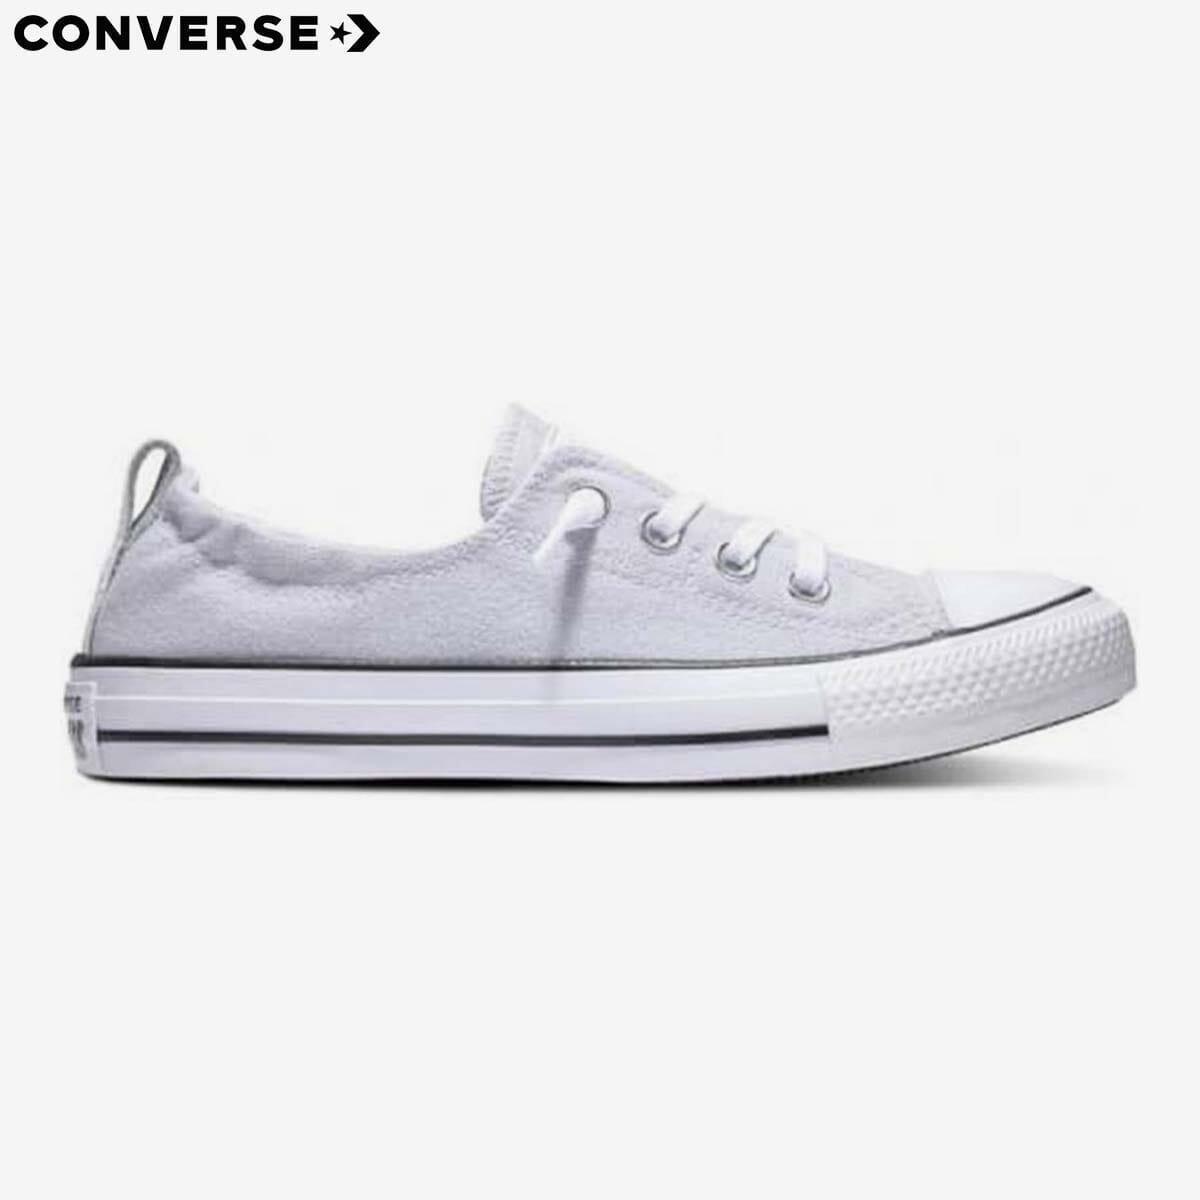 converse x miley cyrus chuck taylor all star white shoes for unisex 563719c